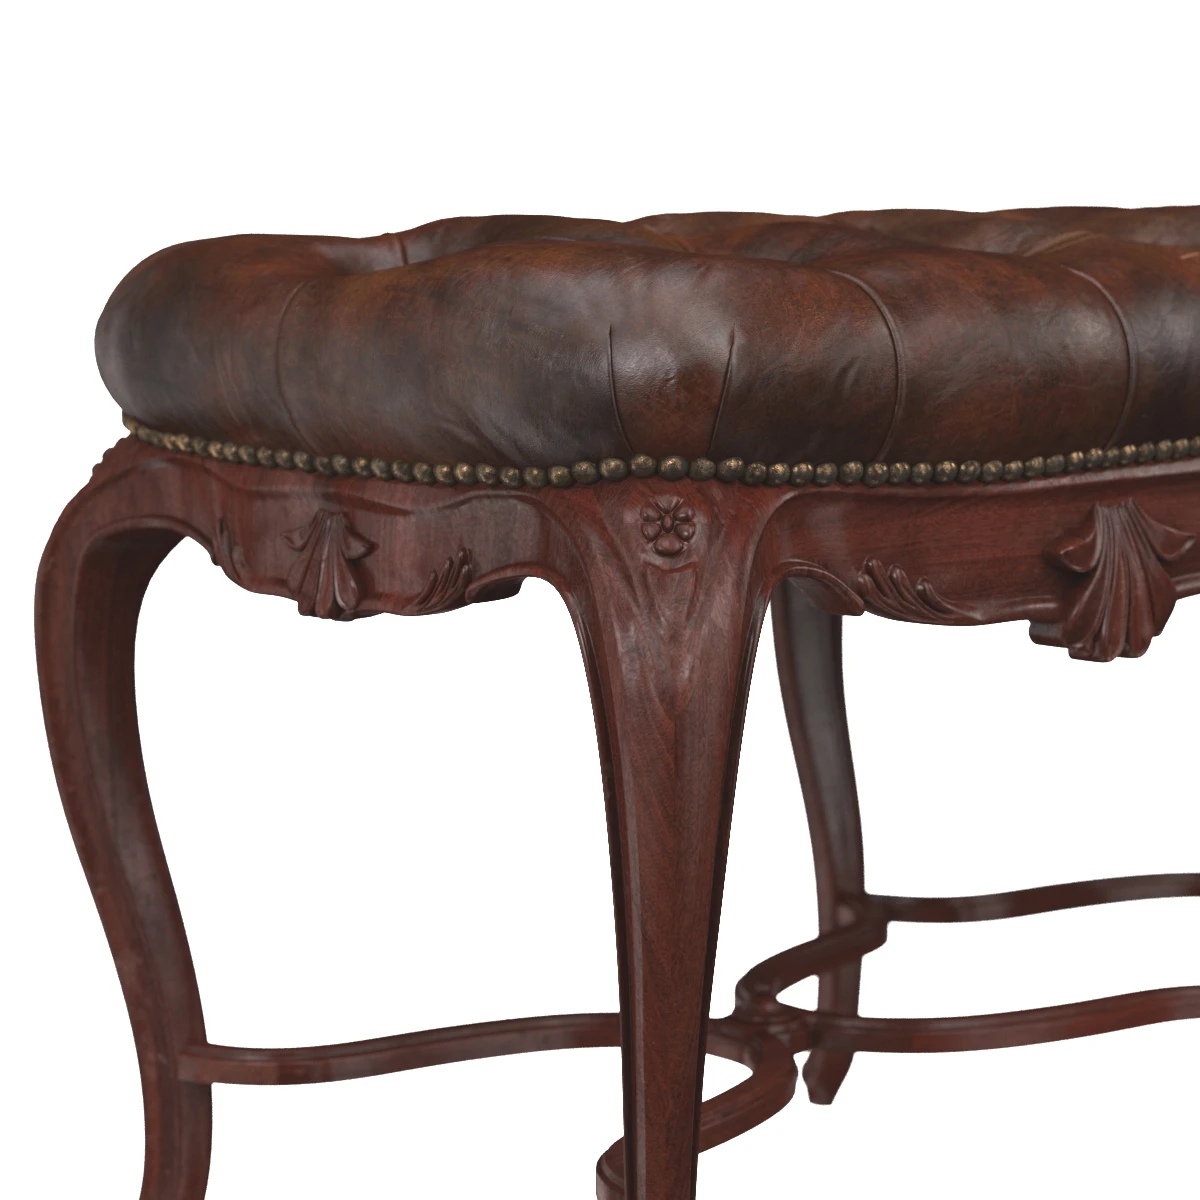 French Leather Tufted Bench C 1900s 3D Model_05